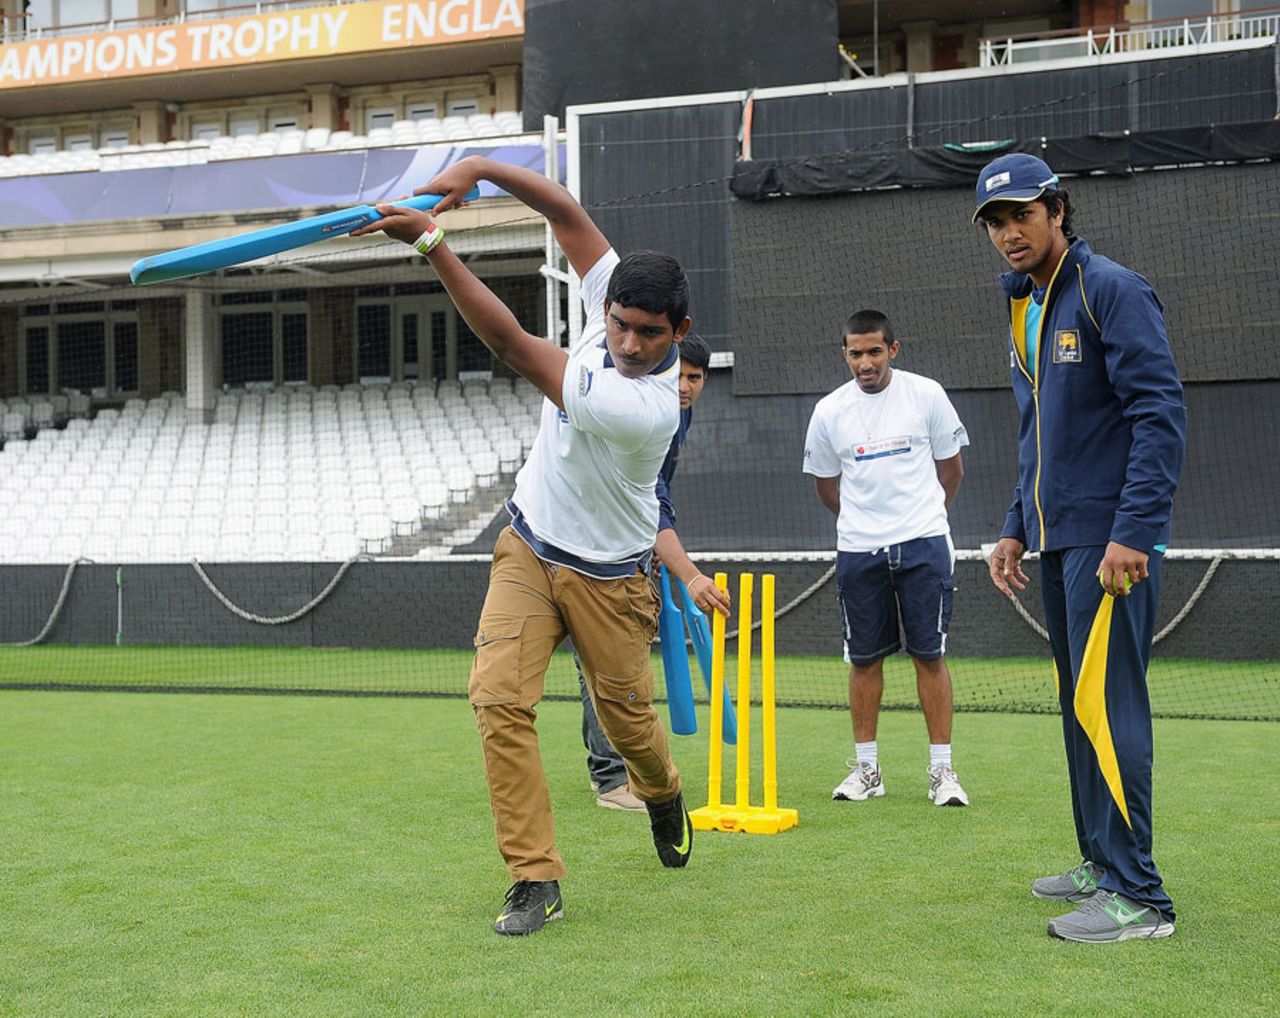 Dinesh Chandimal hands out batting advice to fans, London, June 15, 2013